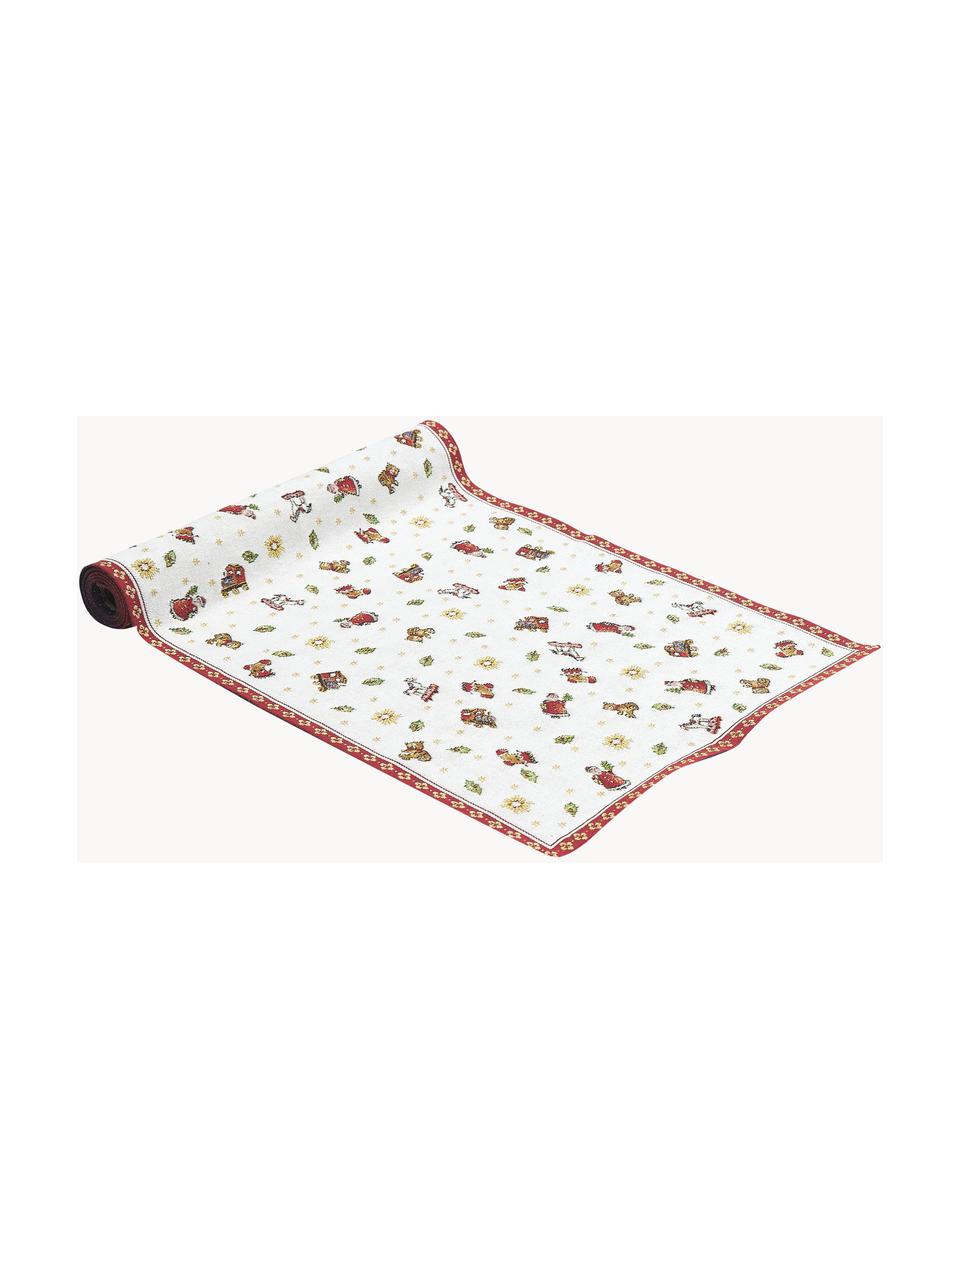 Runner Toy's Delight, 70% cotone, 30% poliestere, Bianco, verde, rosso, Larg. 49 x Lung. 143 cm